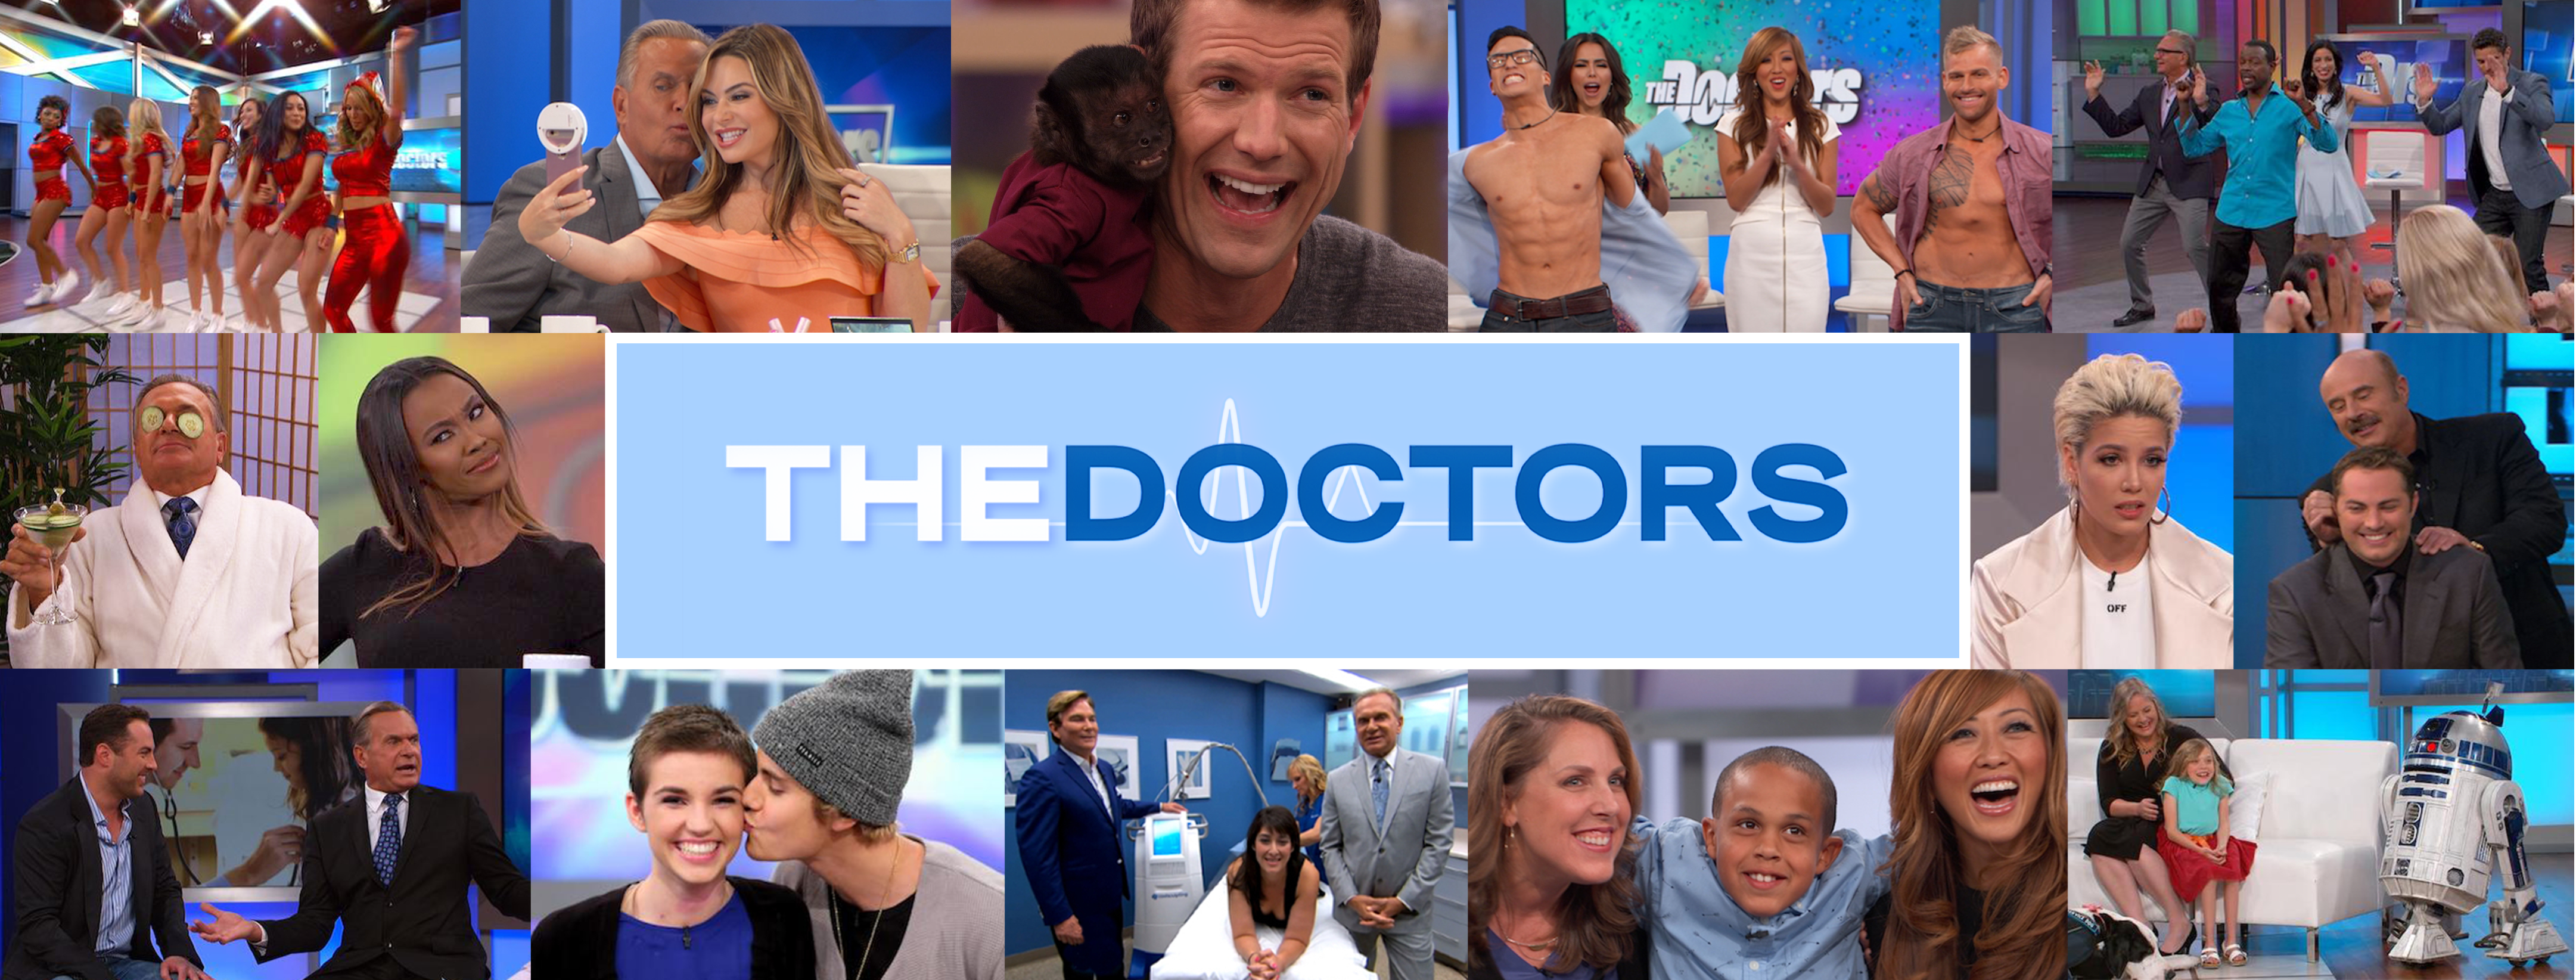 12 Breast Augmentations And Not Stopping The Doctors Tv Show